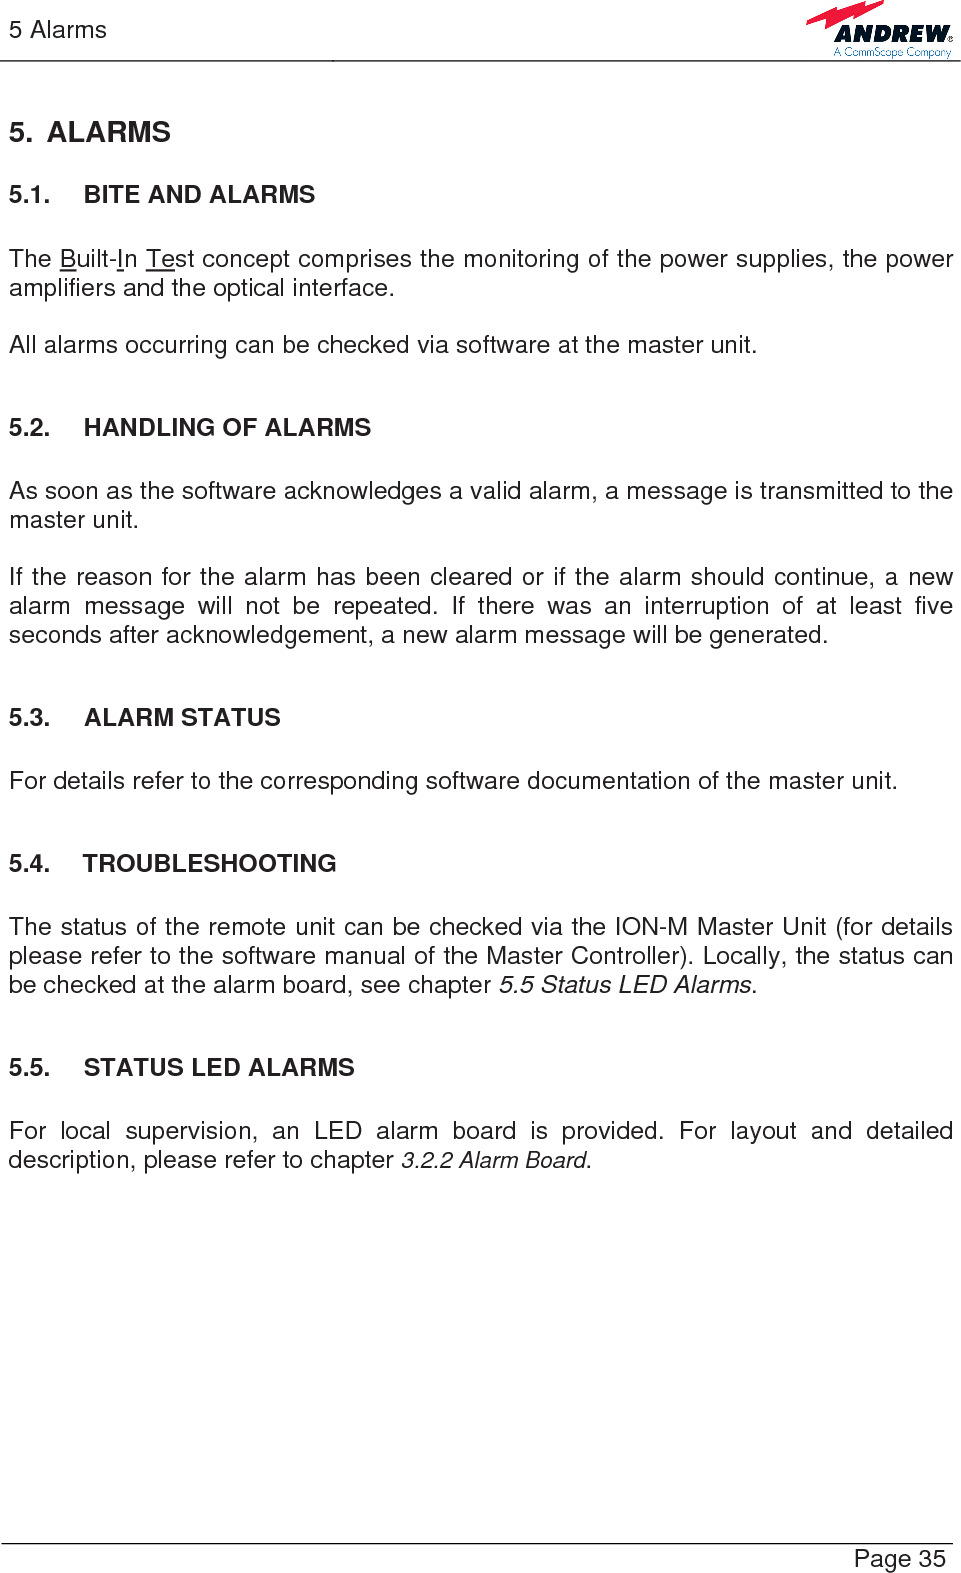 5 Alarms   Page 35 5. ALARMS 5.1. BITE AND ALARMS  The Built-In Test concept comprises the monitoring of the power supplies, the power amplifiers and the optical interface.  All alarms occurring can be checked via software at the master unit.  5.2.  HANDLING OF ALARMS  As soon as the software acknowledges a valid alarm, a message is transmitted to the master unit.  If the reason for the alarm has been cleared or if the alarm should continue, a new alarm message will not be repeated. If there was an interruption of at least five seconds after acknowledgement, a new alarm message will be generated.  5.3. ALARM STATUS  For details refer to the corresponding software documentation of the master unit.  5.4. TROUBLESHOOTING  The status of the remote unit can be checked via the ION-M Master Unit (for details please refer to the software manual of the Master Controller). Locally, the status can be checked at the alarm board, see chapter 5.5 Status LED Alarms.  5.5.  STATUS LED ALARMS  For local supervision, an LED alarm board is provided. For layout and detailed description, please refer to chapter 3.2.2 Alarm Board.  